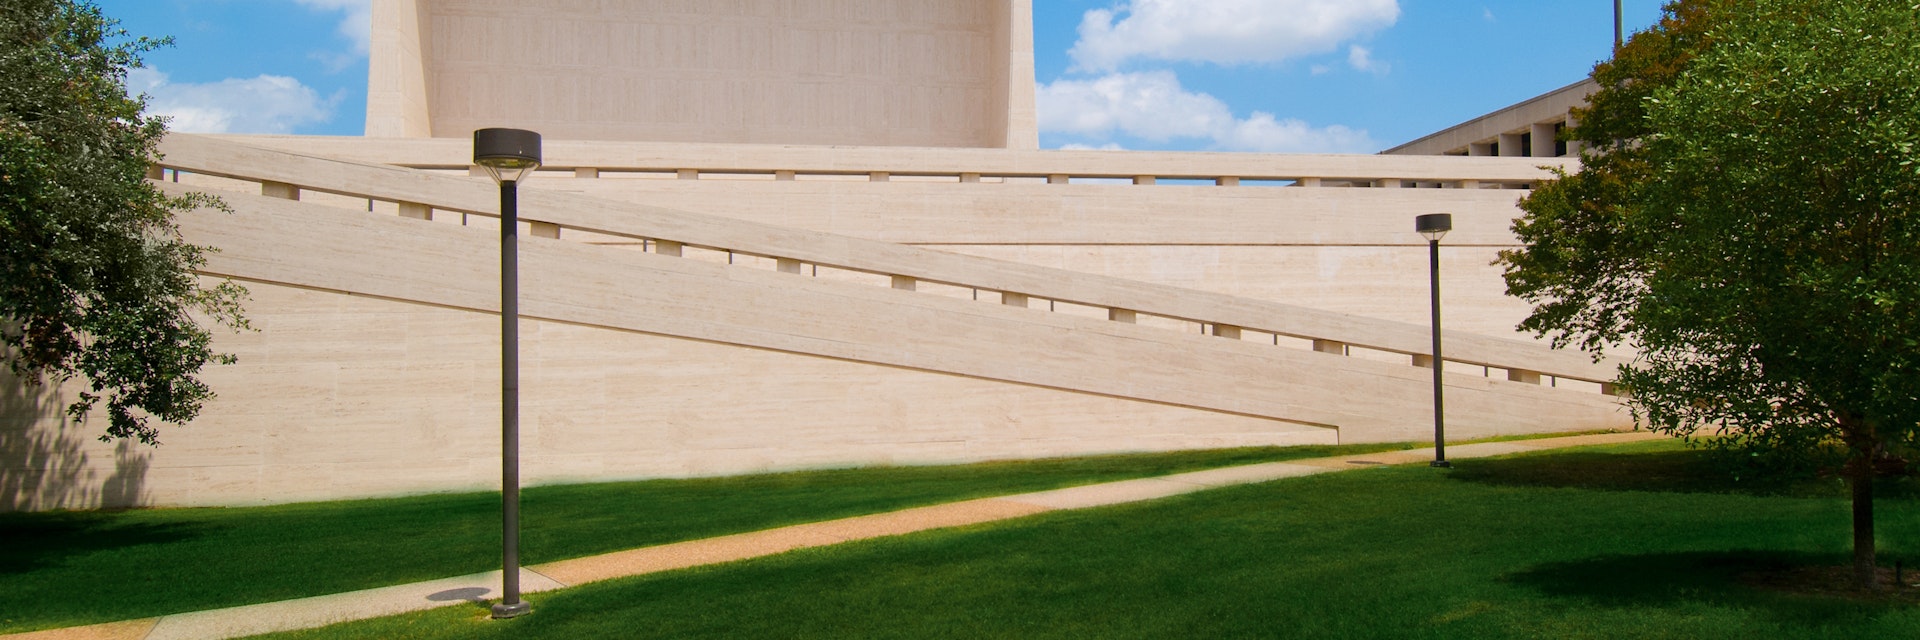 LBJ Library and Museum